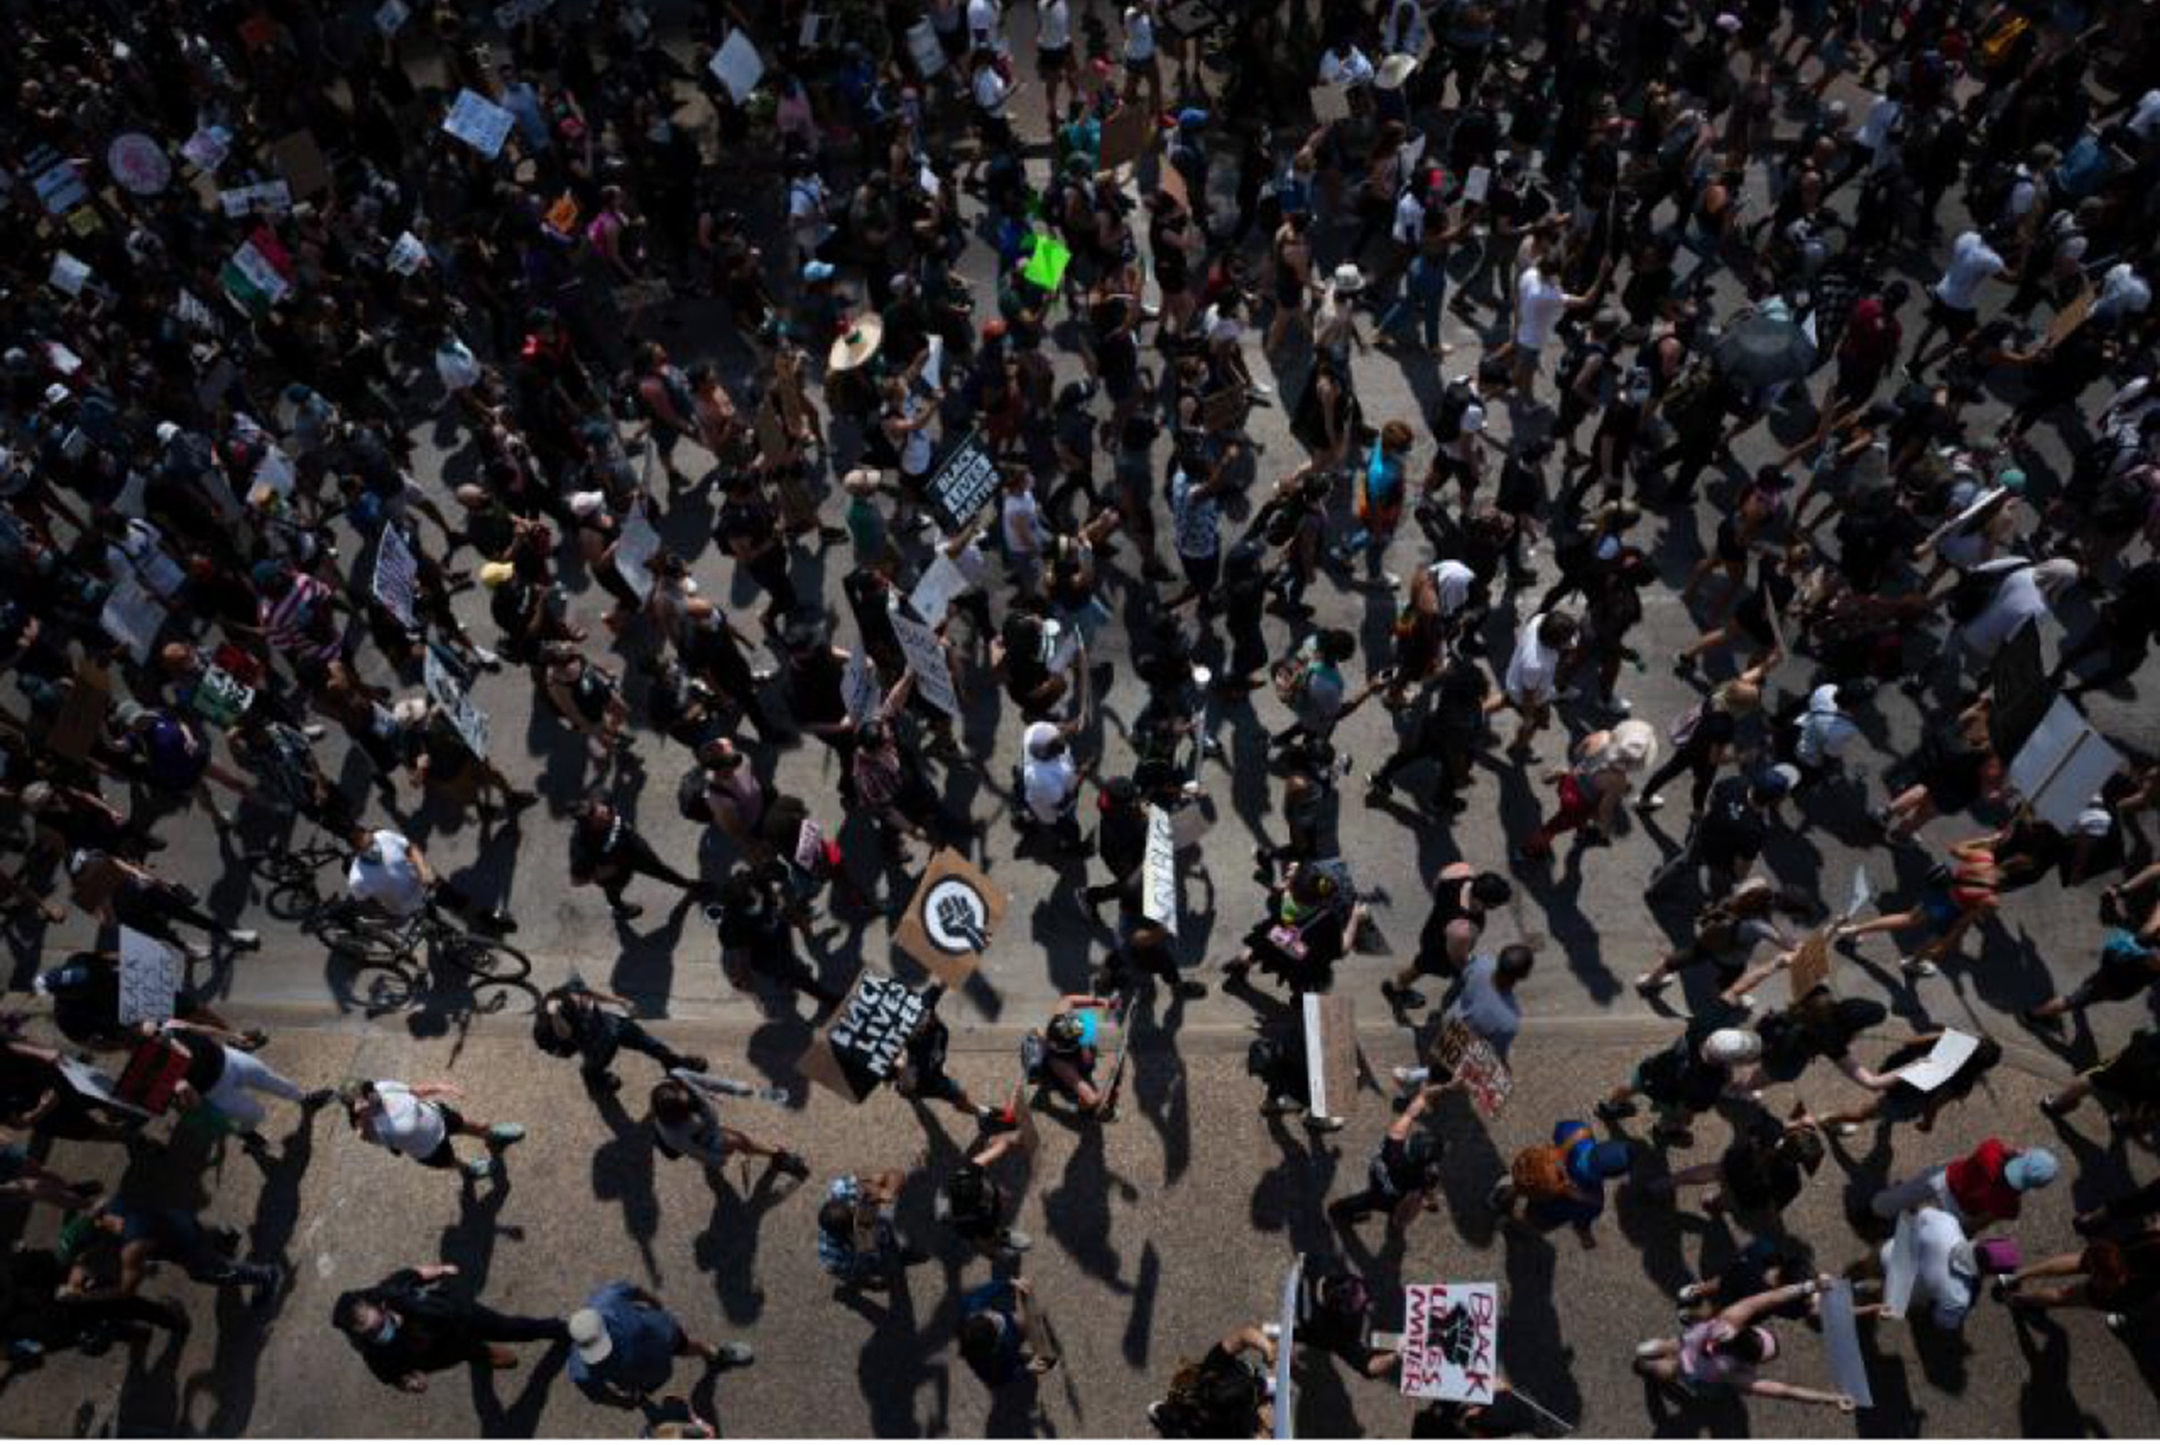 Color photograph of a crowd of protesters seen from above